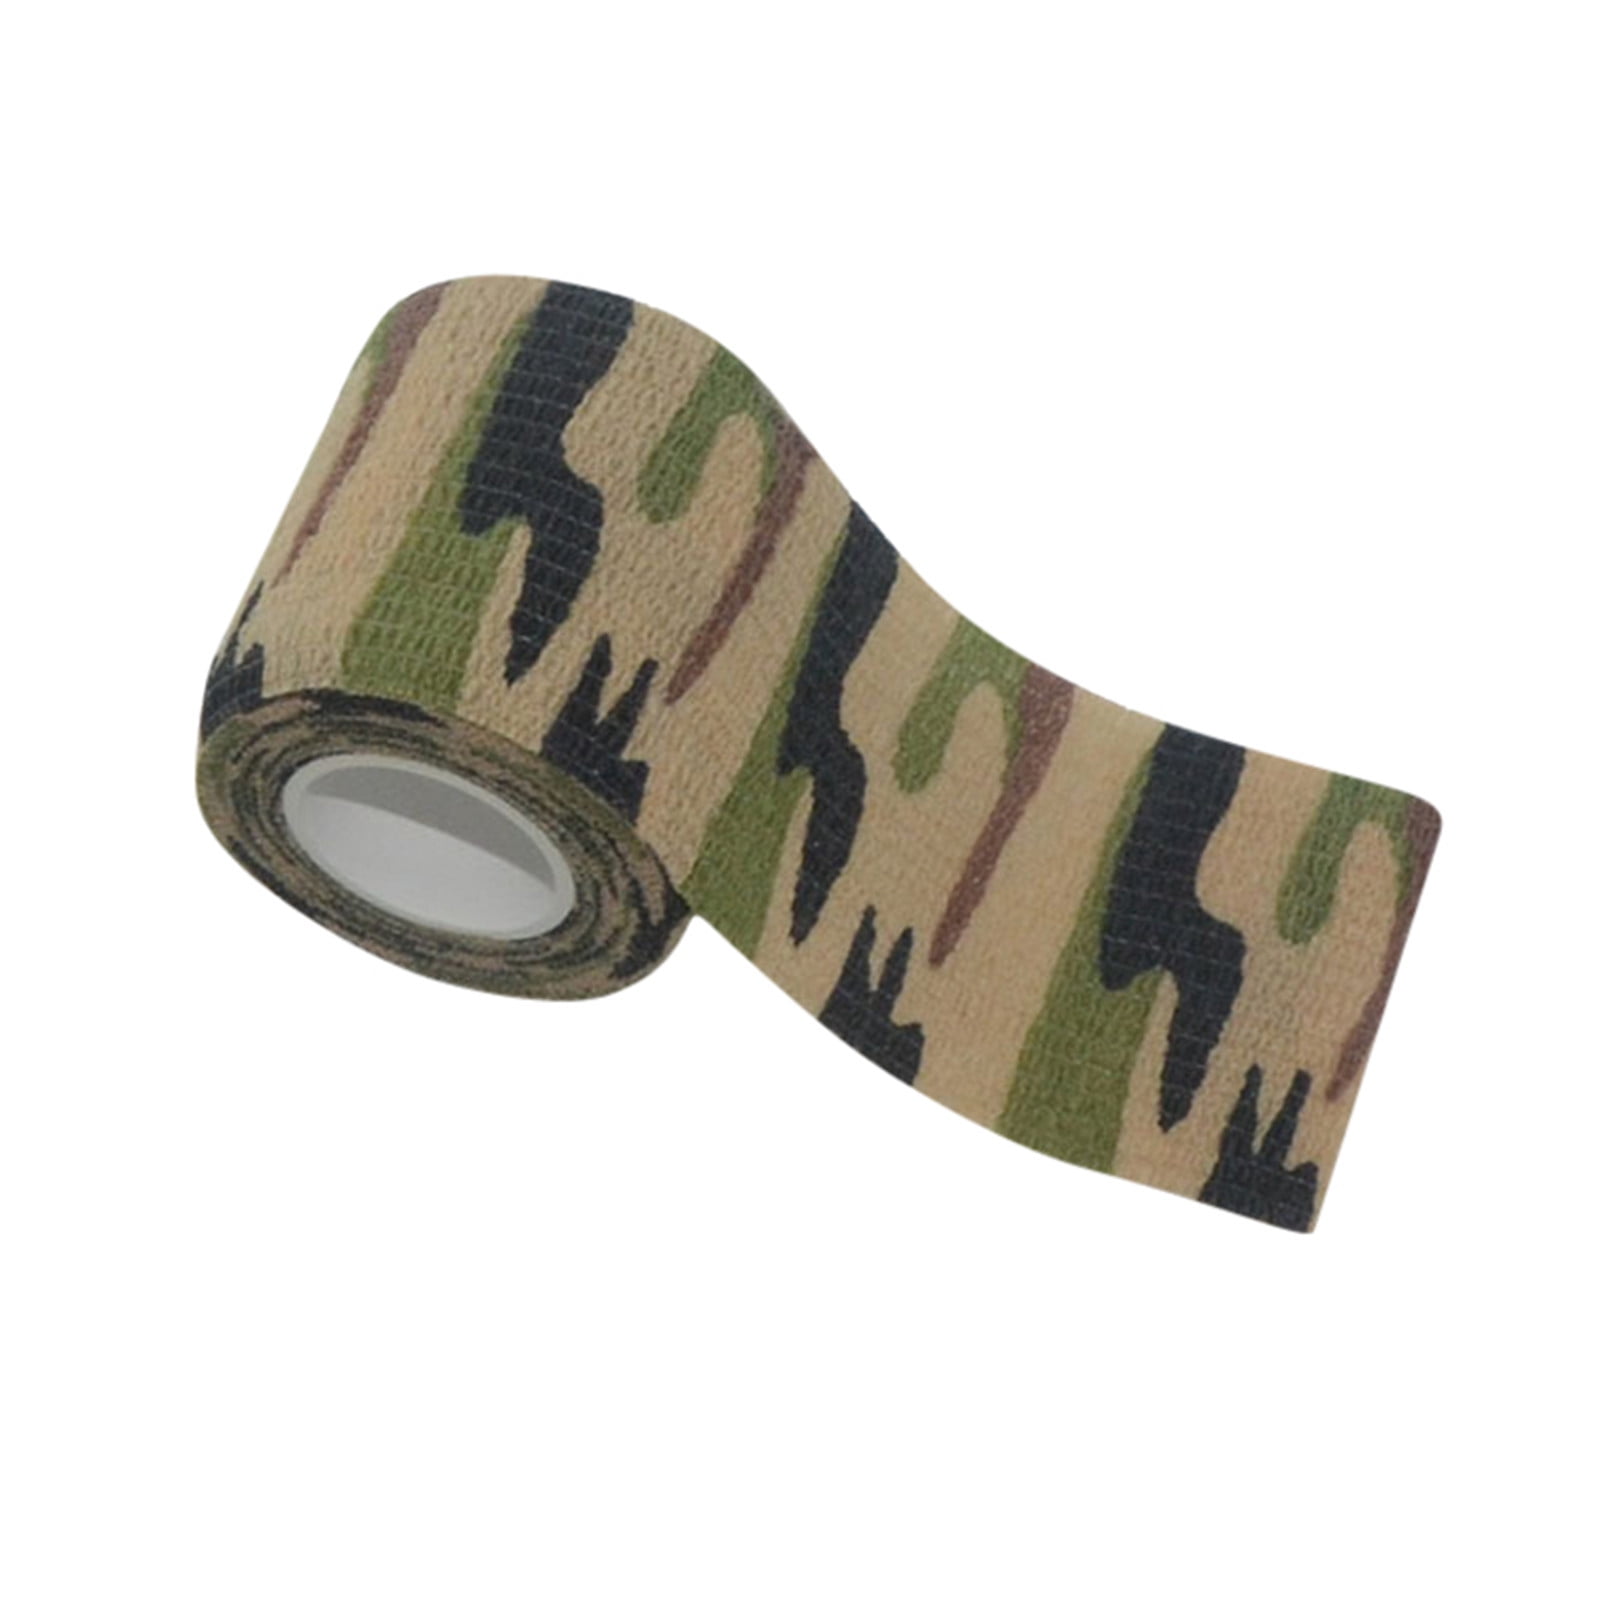 2PCS/ Set Hunting Camping Camo Tape Self-adhesive Stealth Tape Camouflage Wrap 